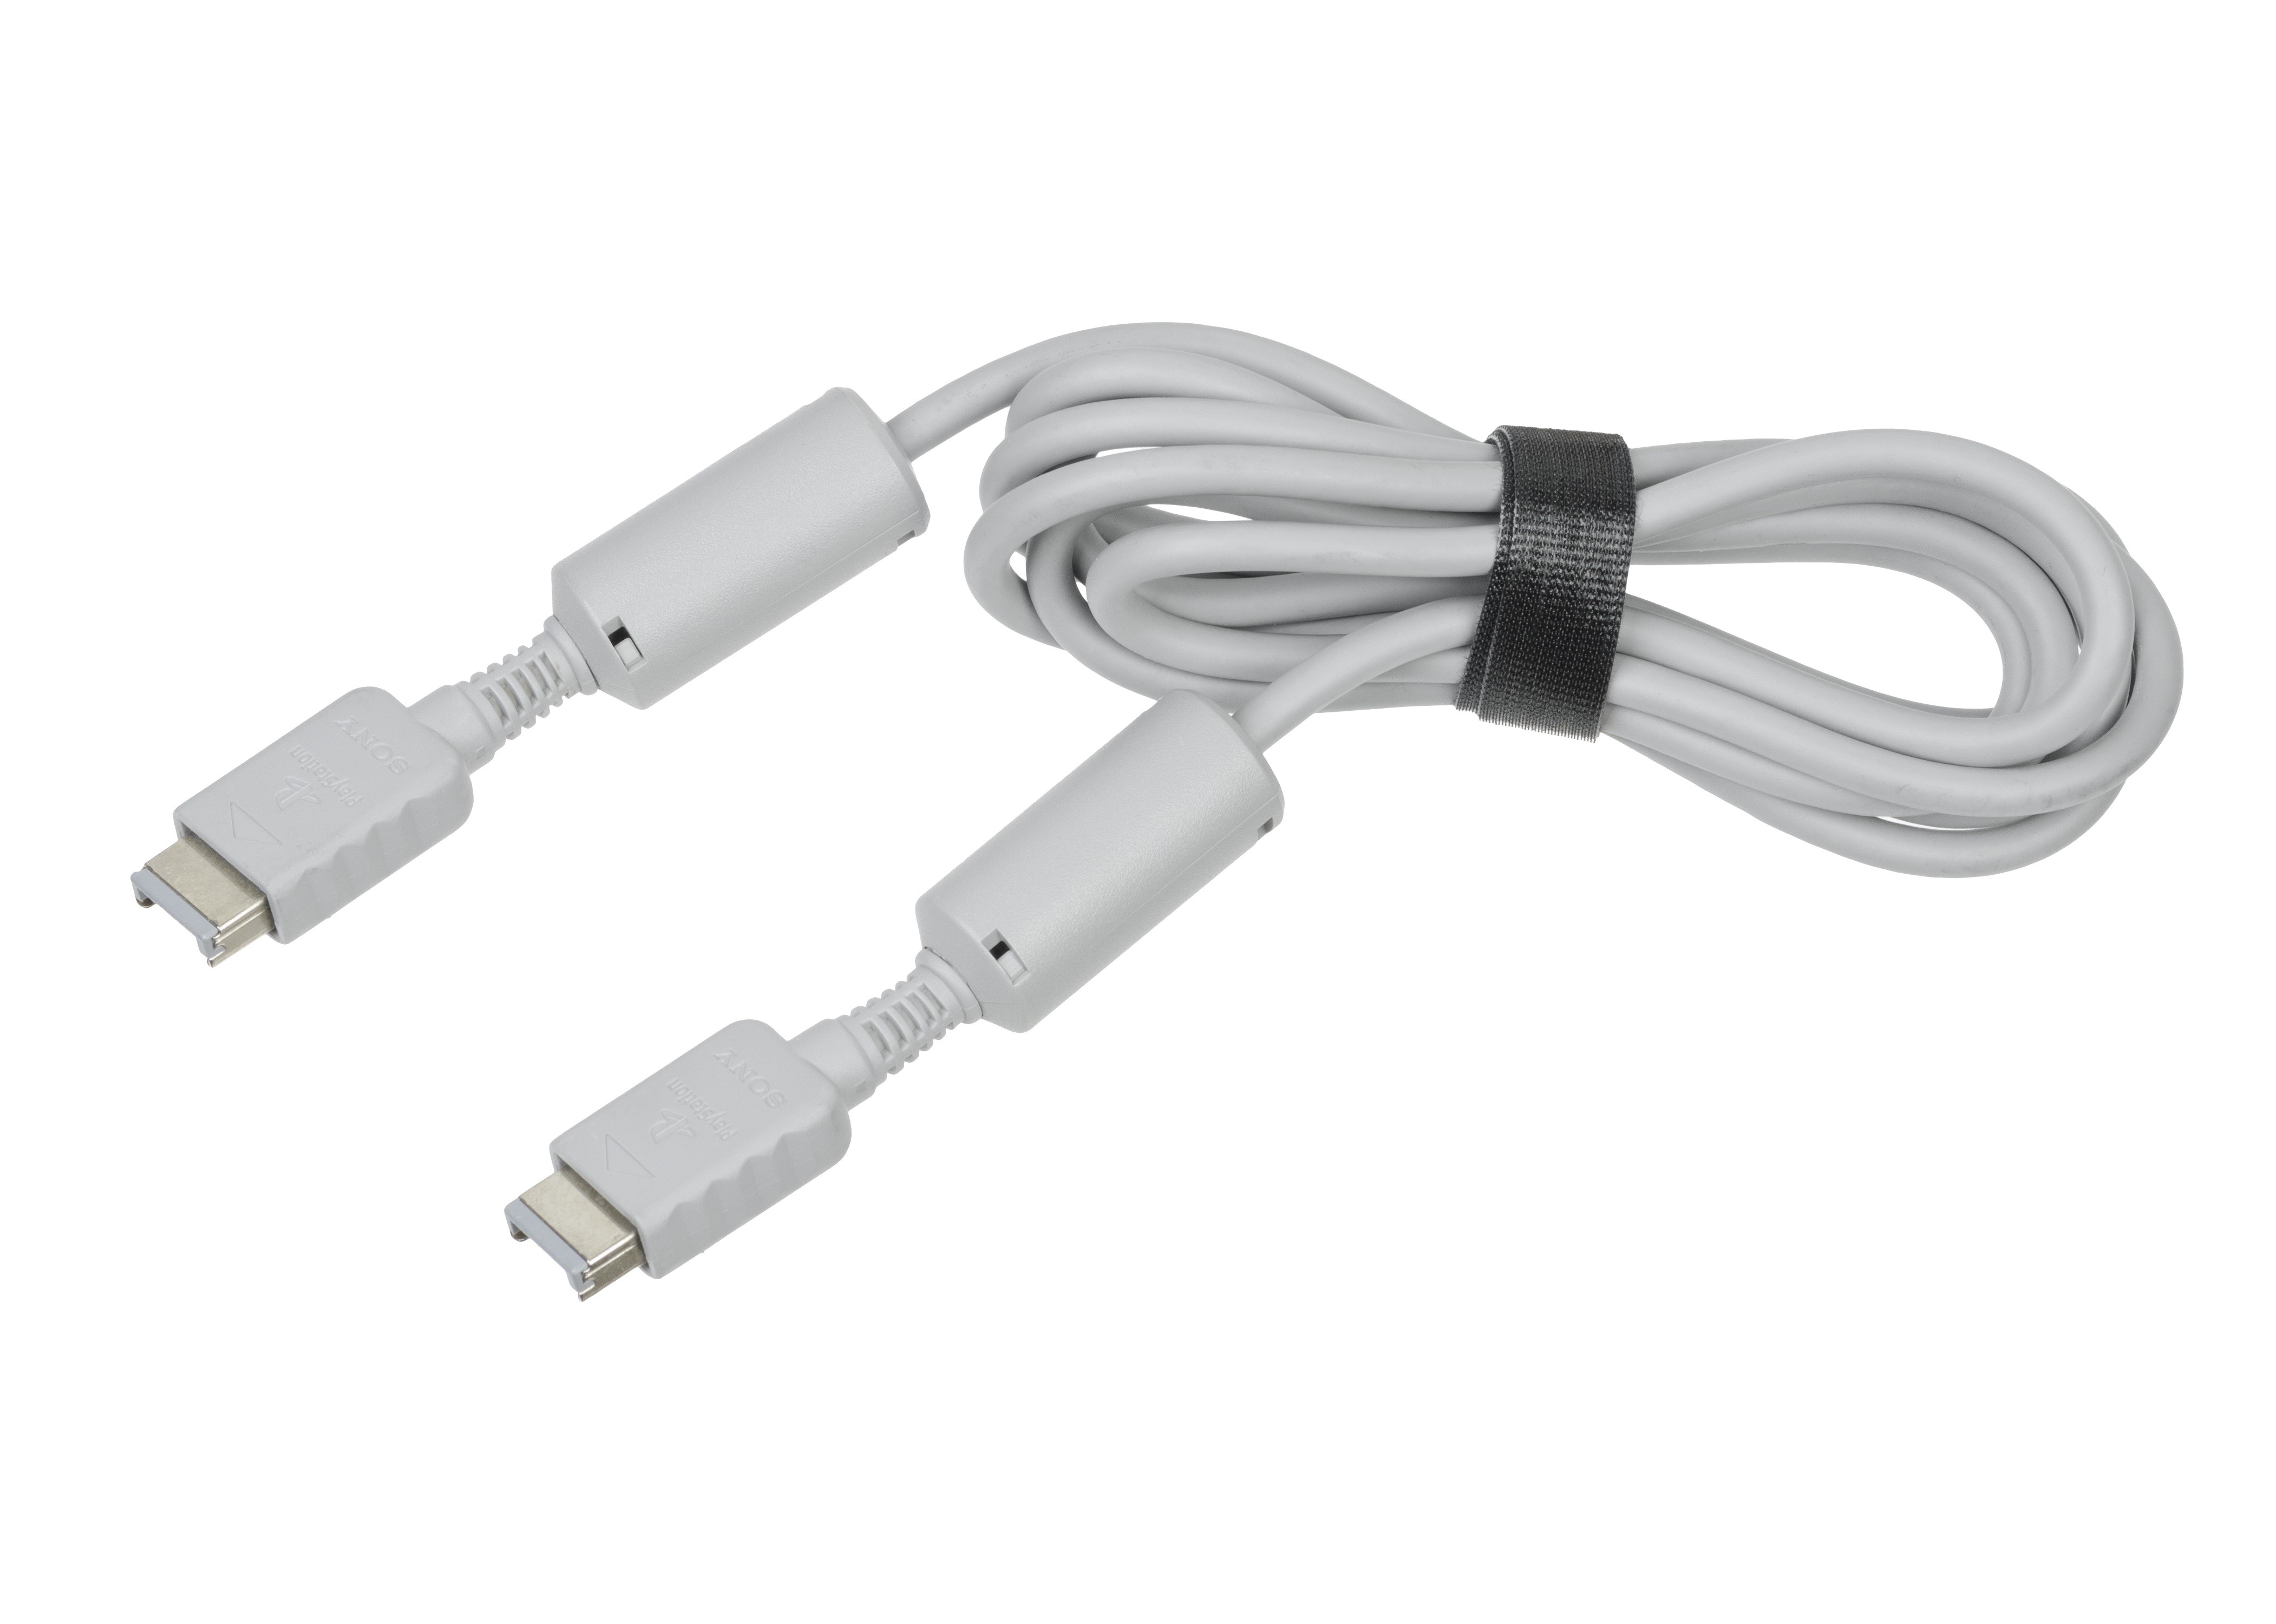 PlayStation 1 Link Cable - Playstation 1 Hardware